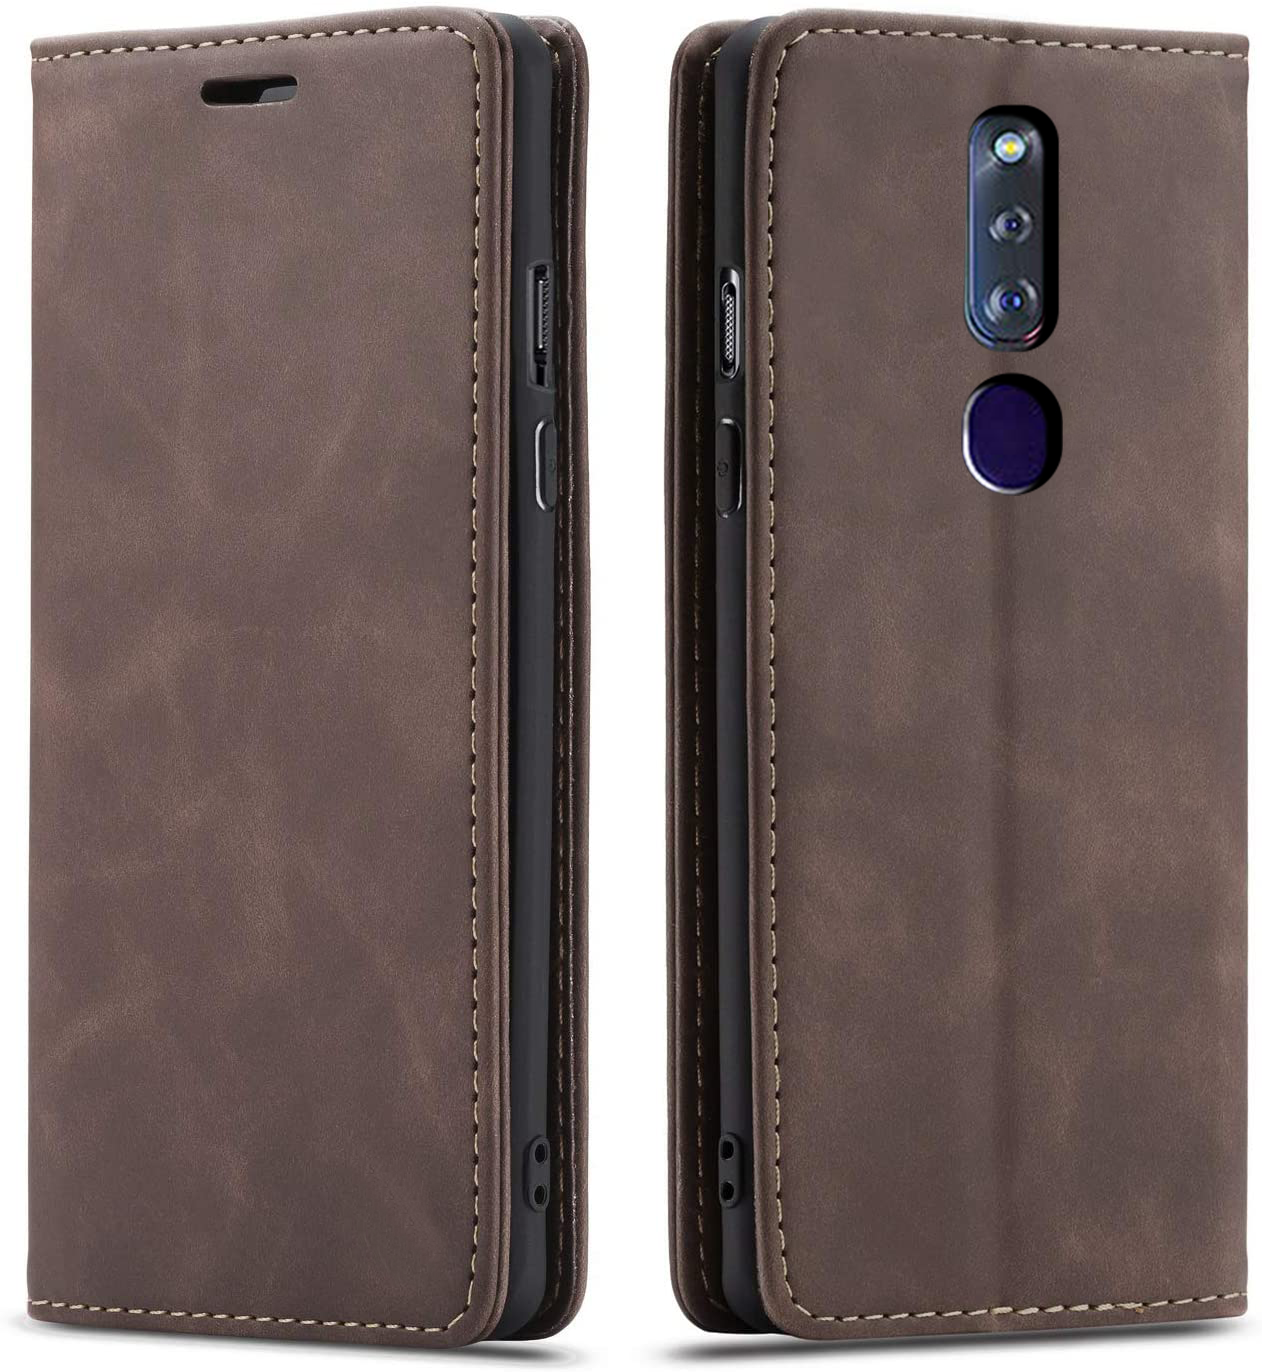 Oppo F11 Pro full body protection Leather Wallet flip case cover by Excelsior